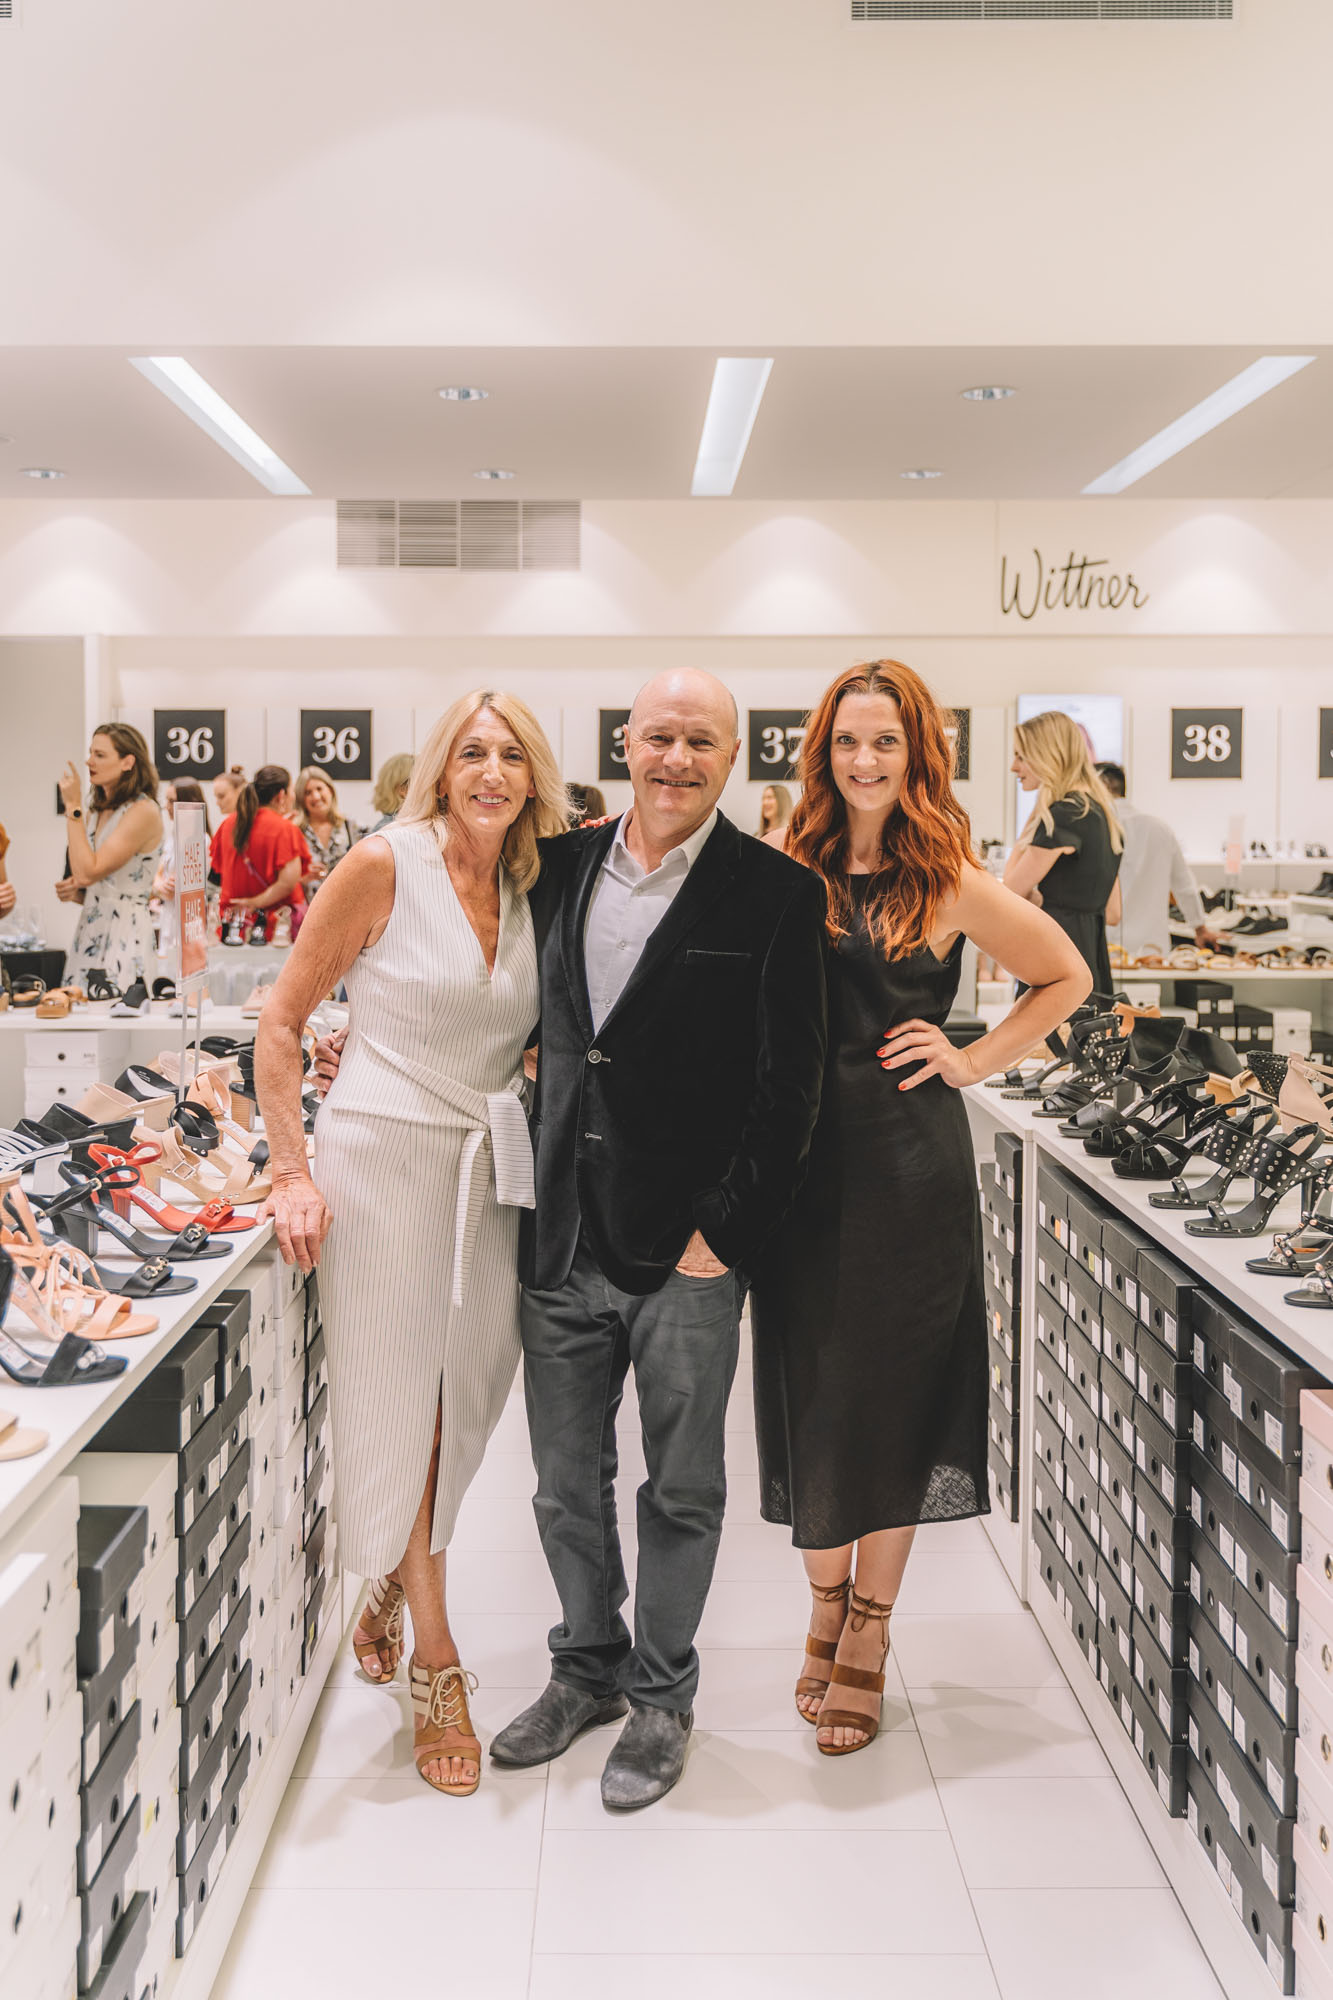 Wittner Opens Outlet Store on James 